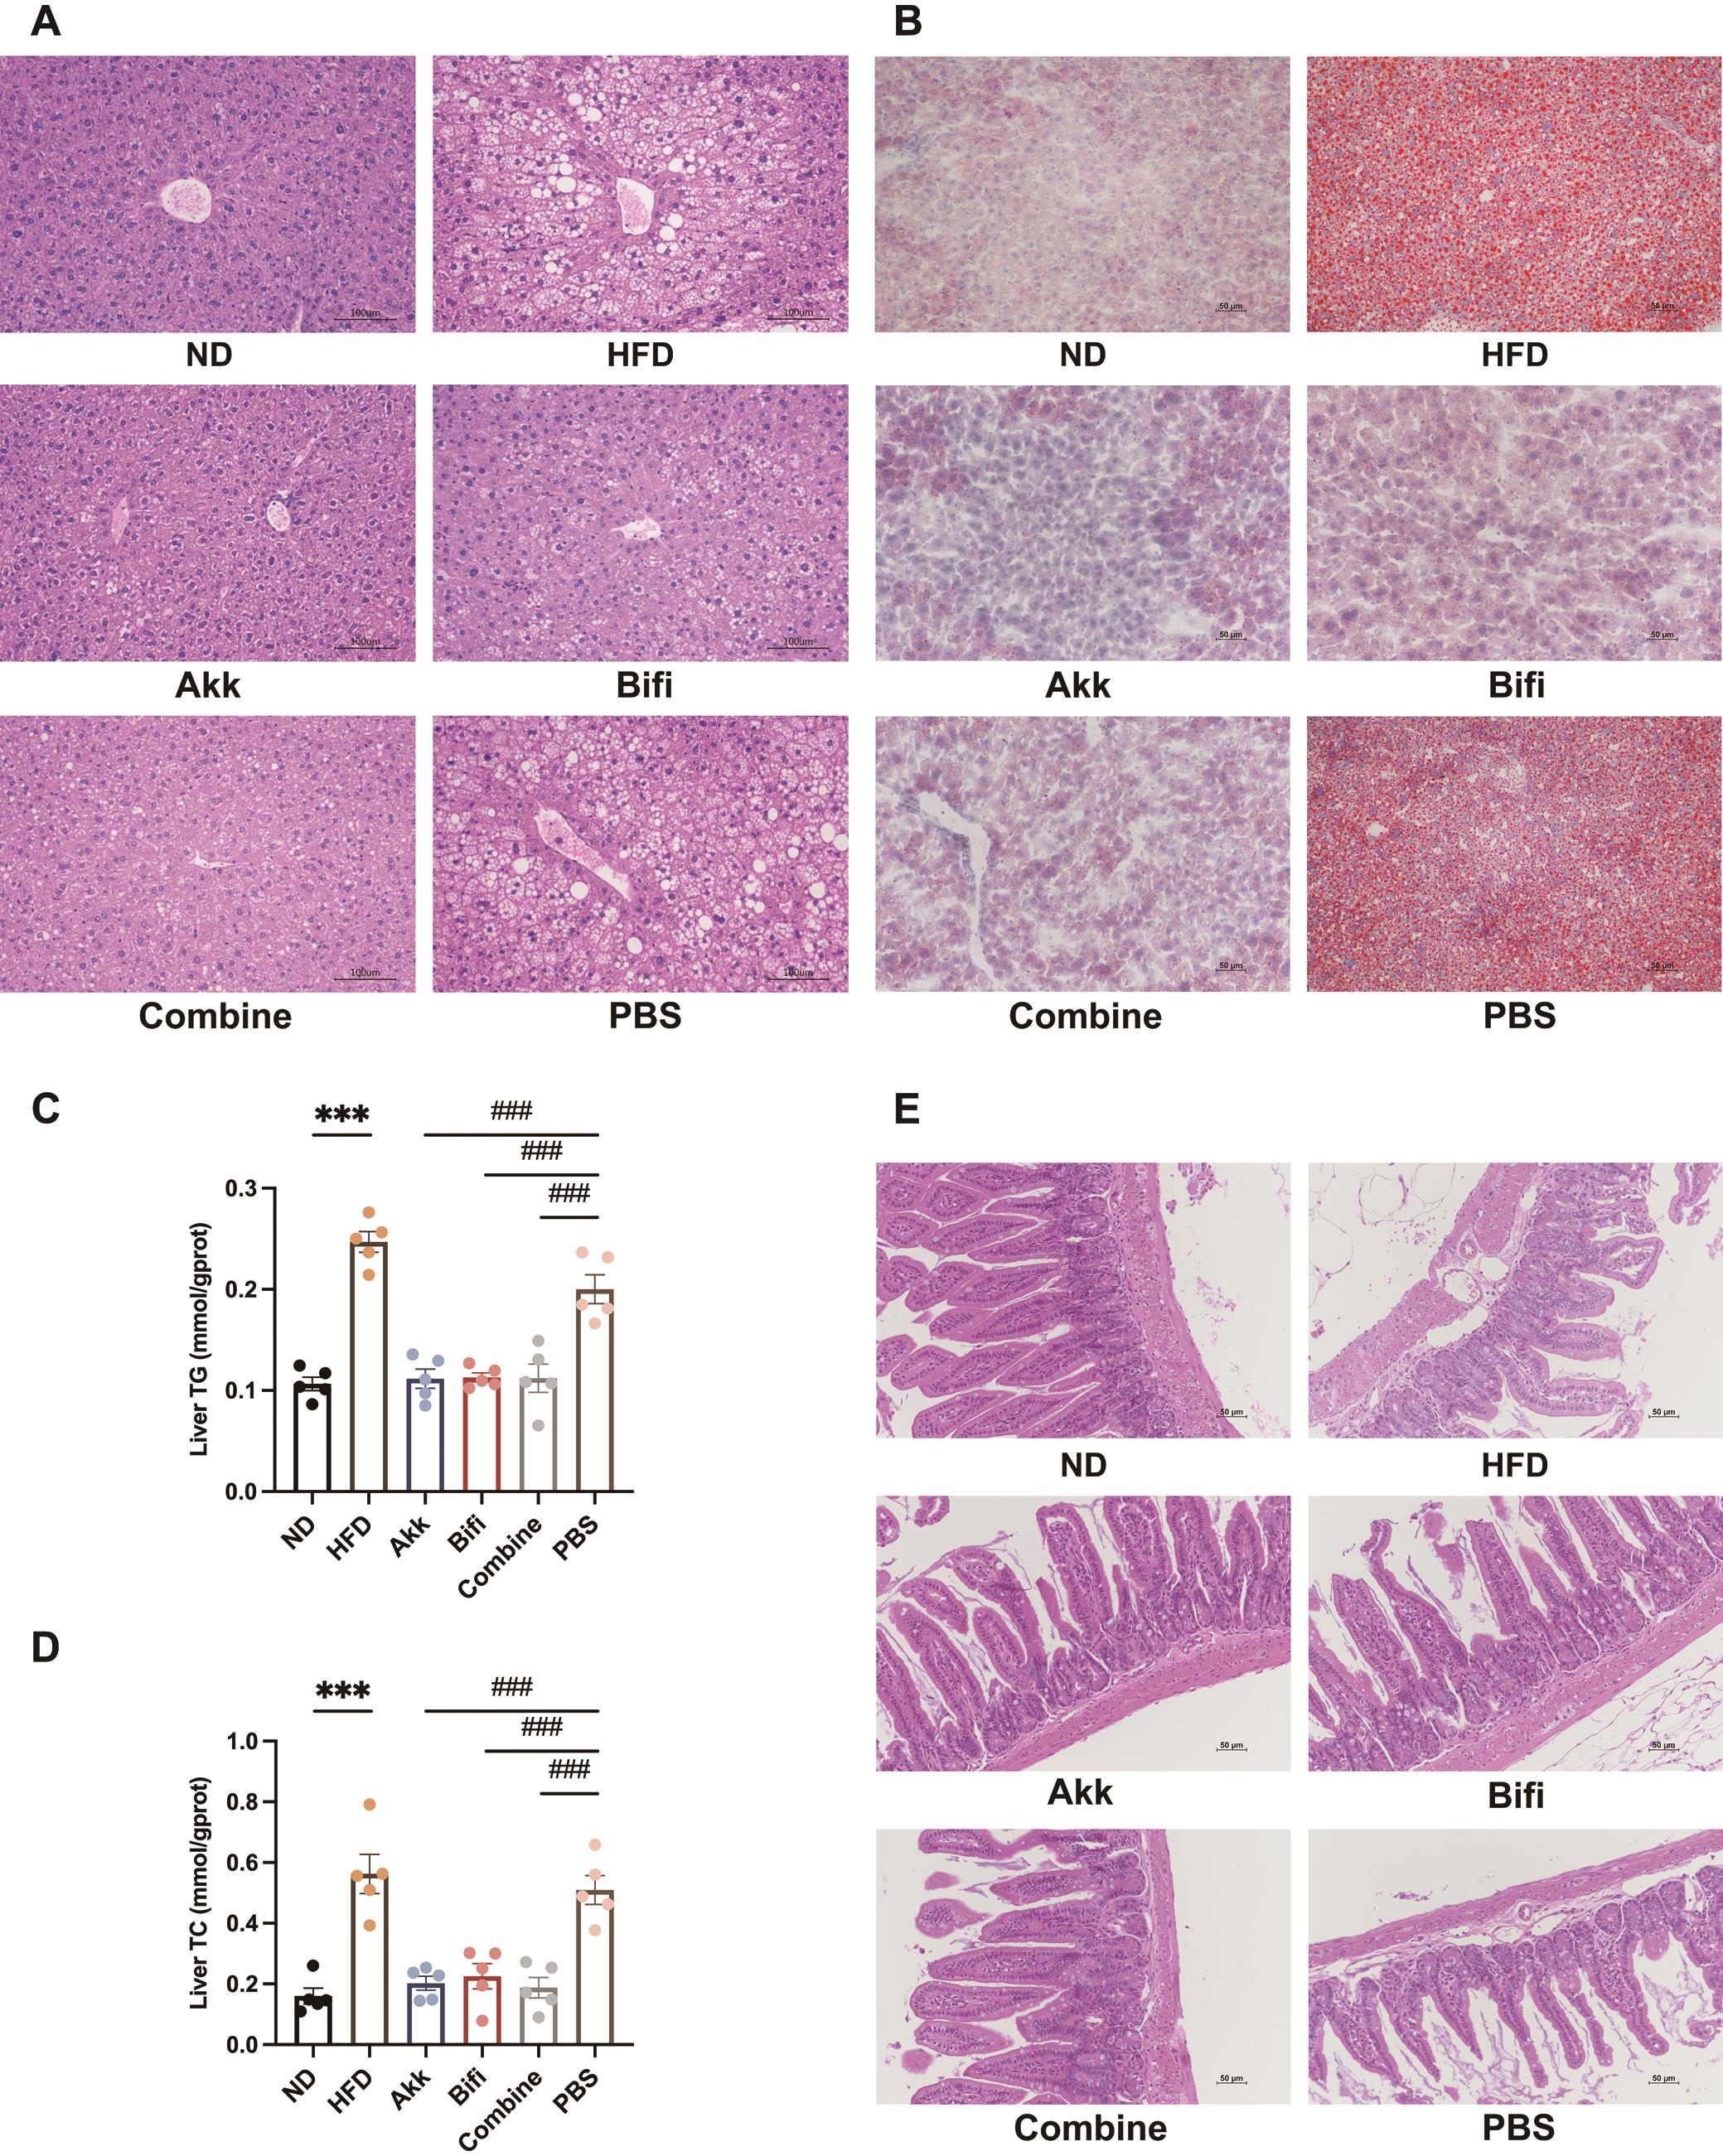 Effect of administration of <italic>A. muciniphila</italic> or <italic>B. bifidum</italic> on hepatic steatosis and intestinal barrier function in mice.